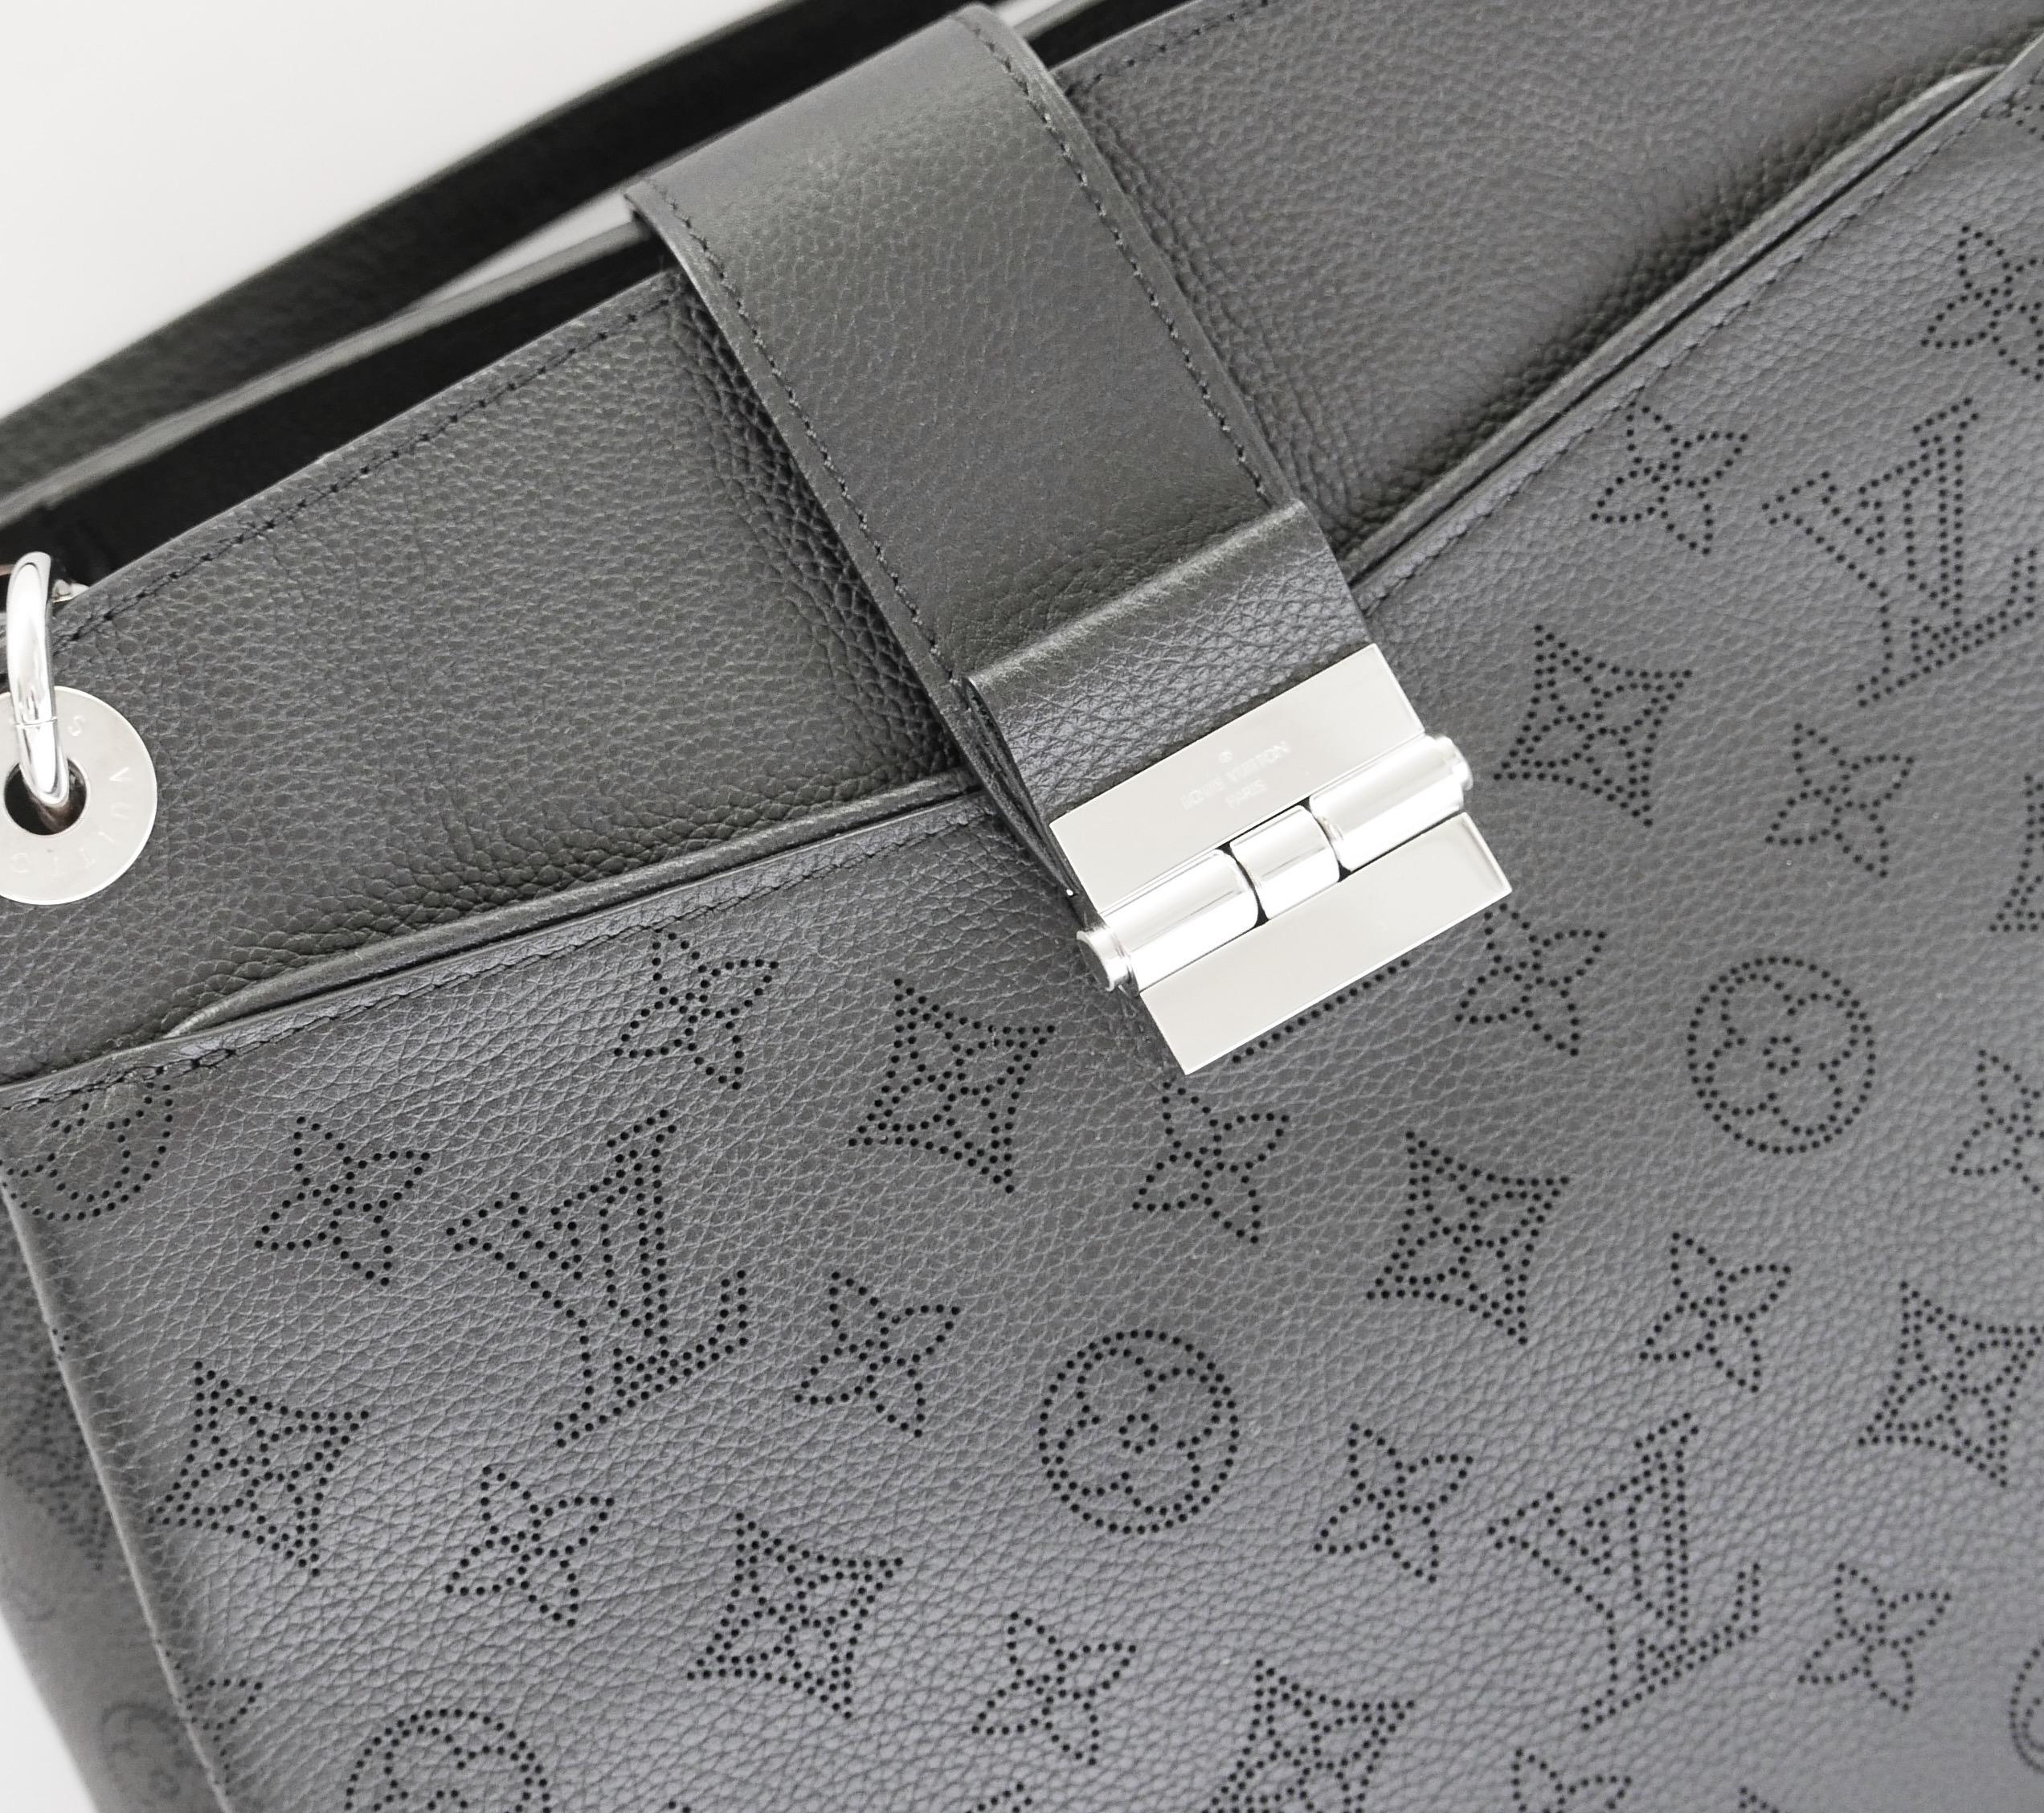 Gorgeous Louis Vuitton Sevres Mahina Noir bag. Unworn with dustbag, care leaflet, sticker/tag and keyring fob which has not yet been attached to bag . Made from black monogram Mahina leather with silver tone hardware and 2 shoulder straps. Lined in